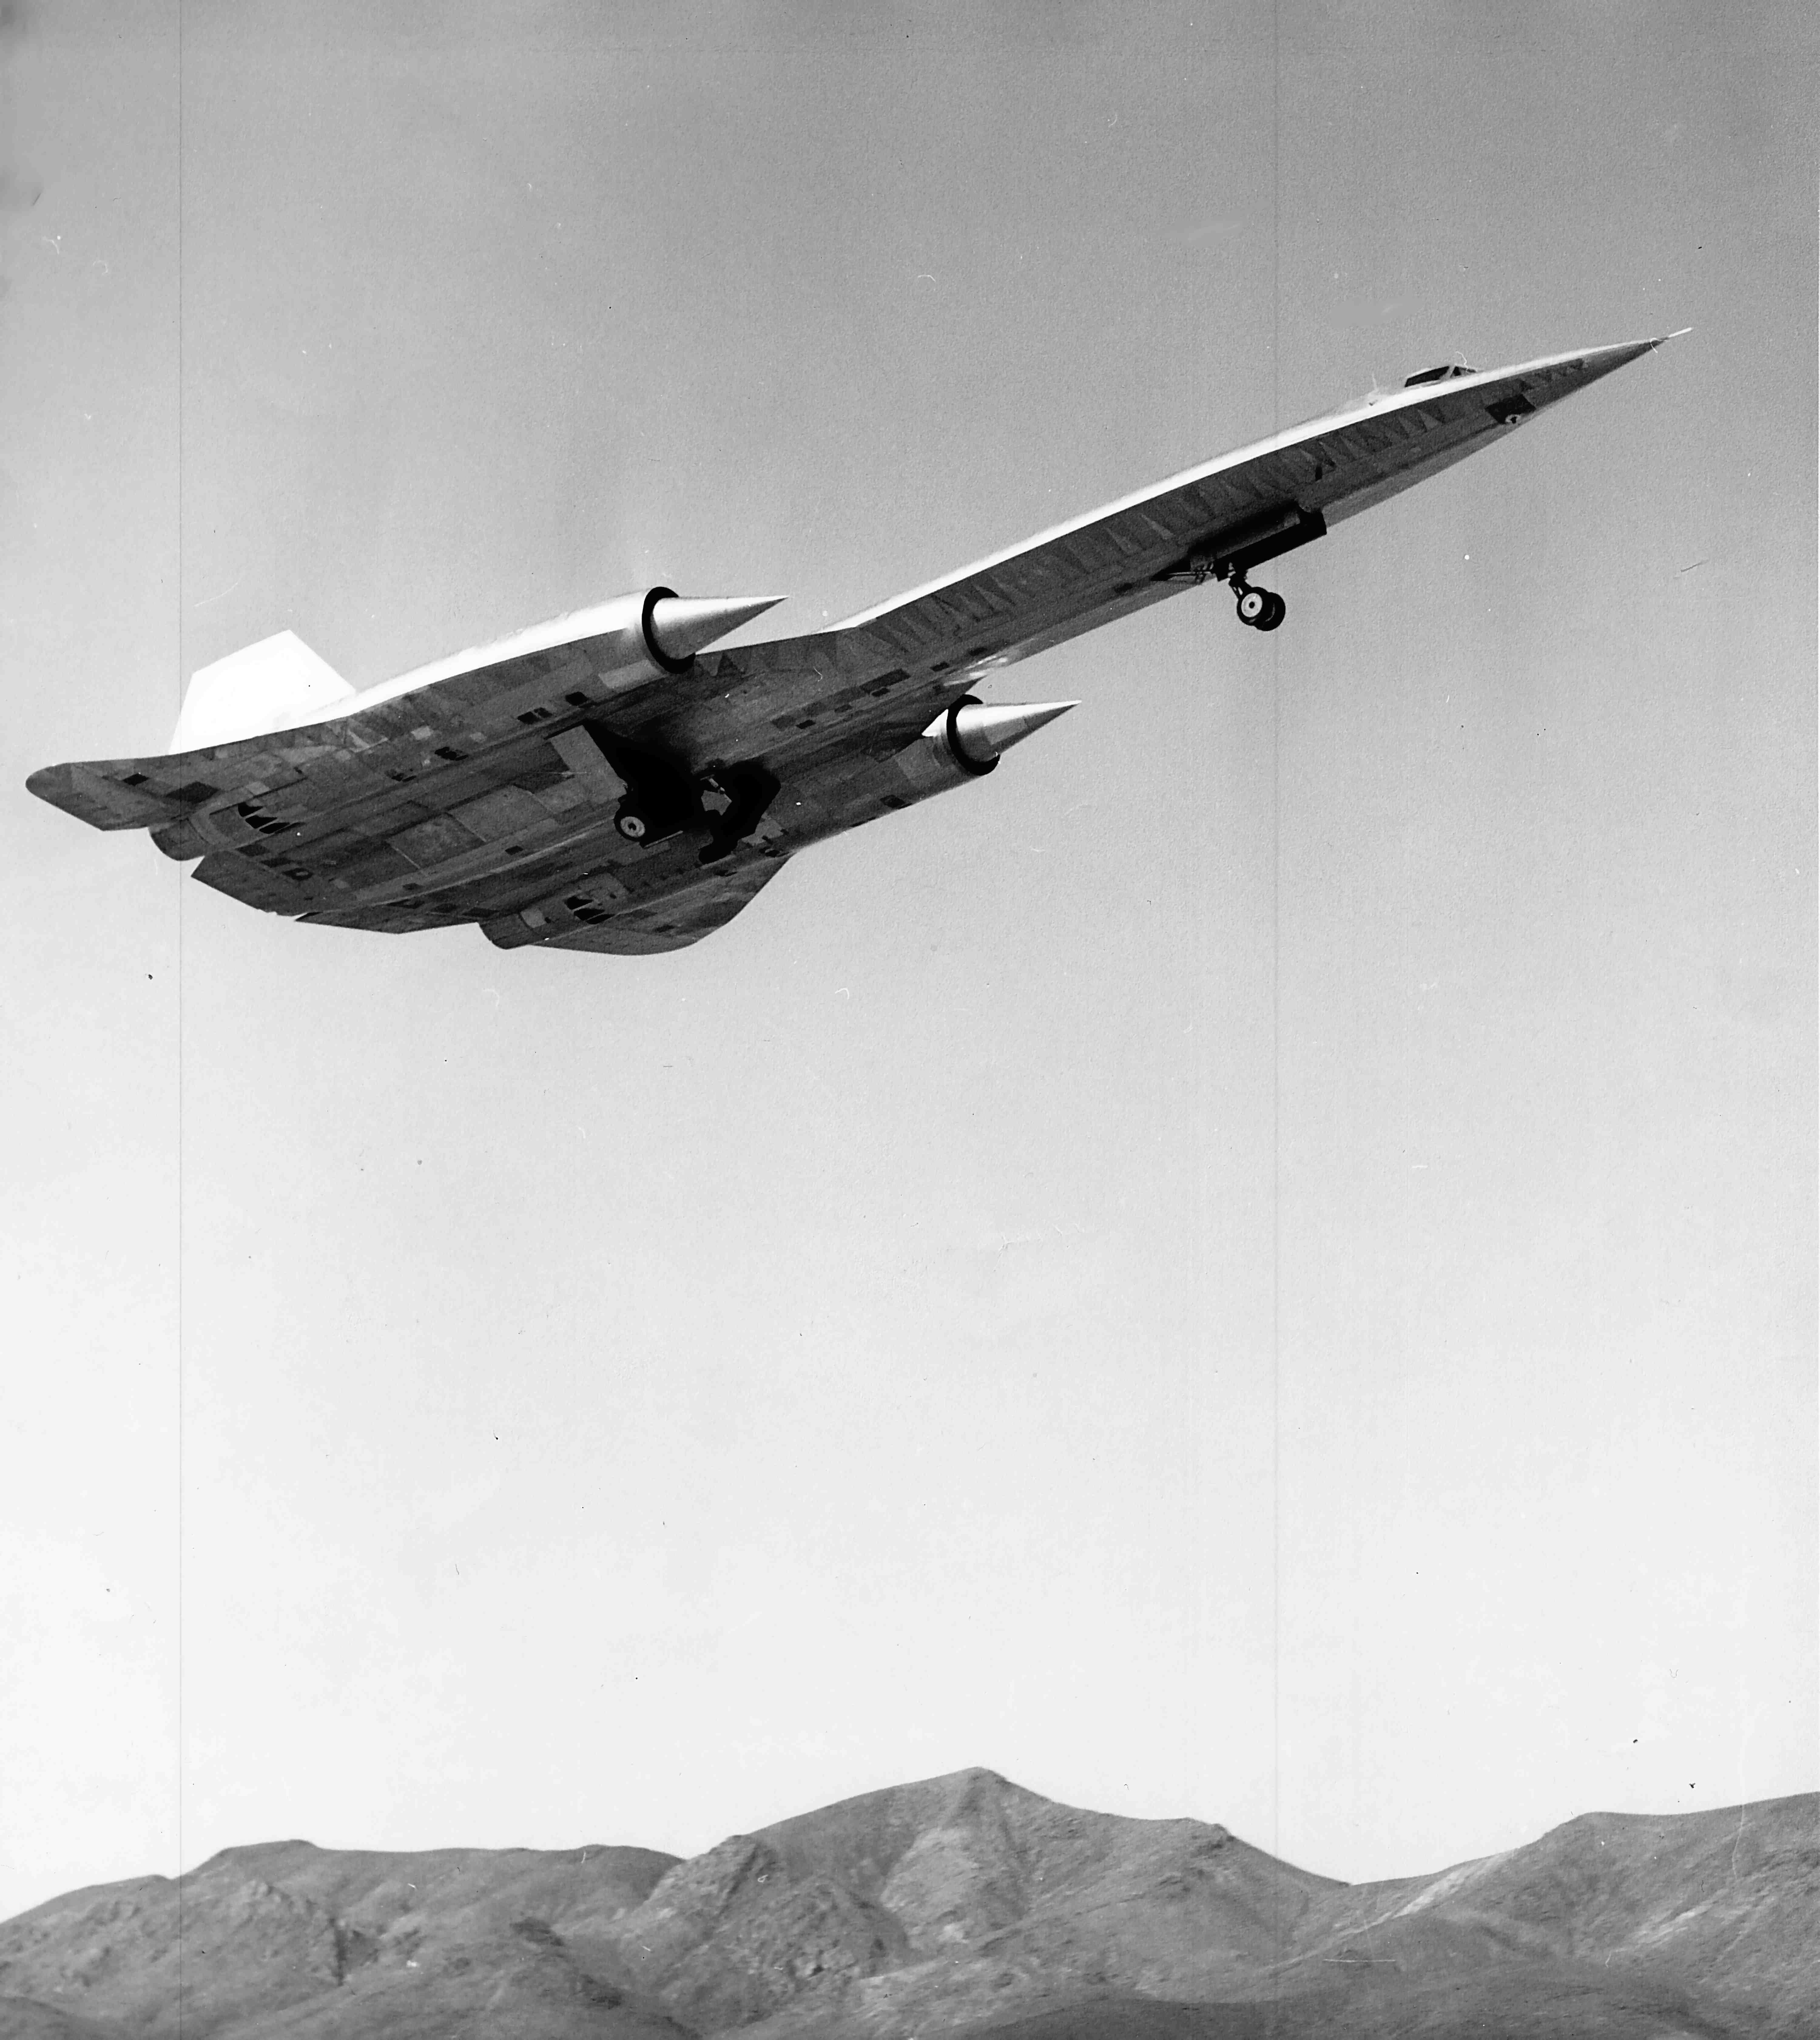 "Article 121" takes off on its first flight at Groom Lake, Nevada, 30 April 1962. (Lockheed Martin)